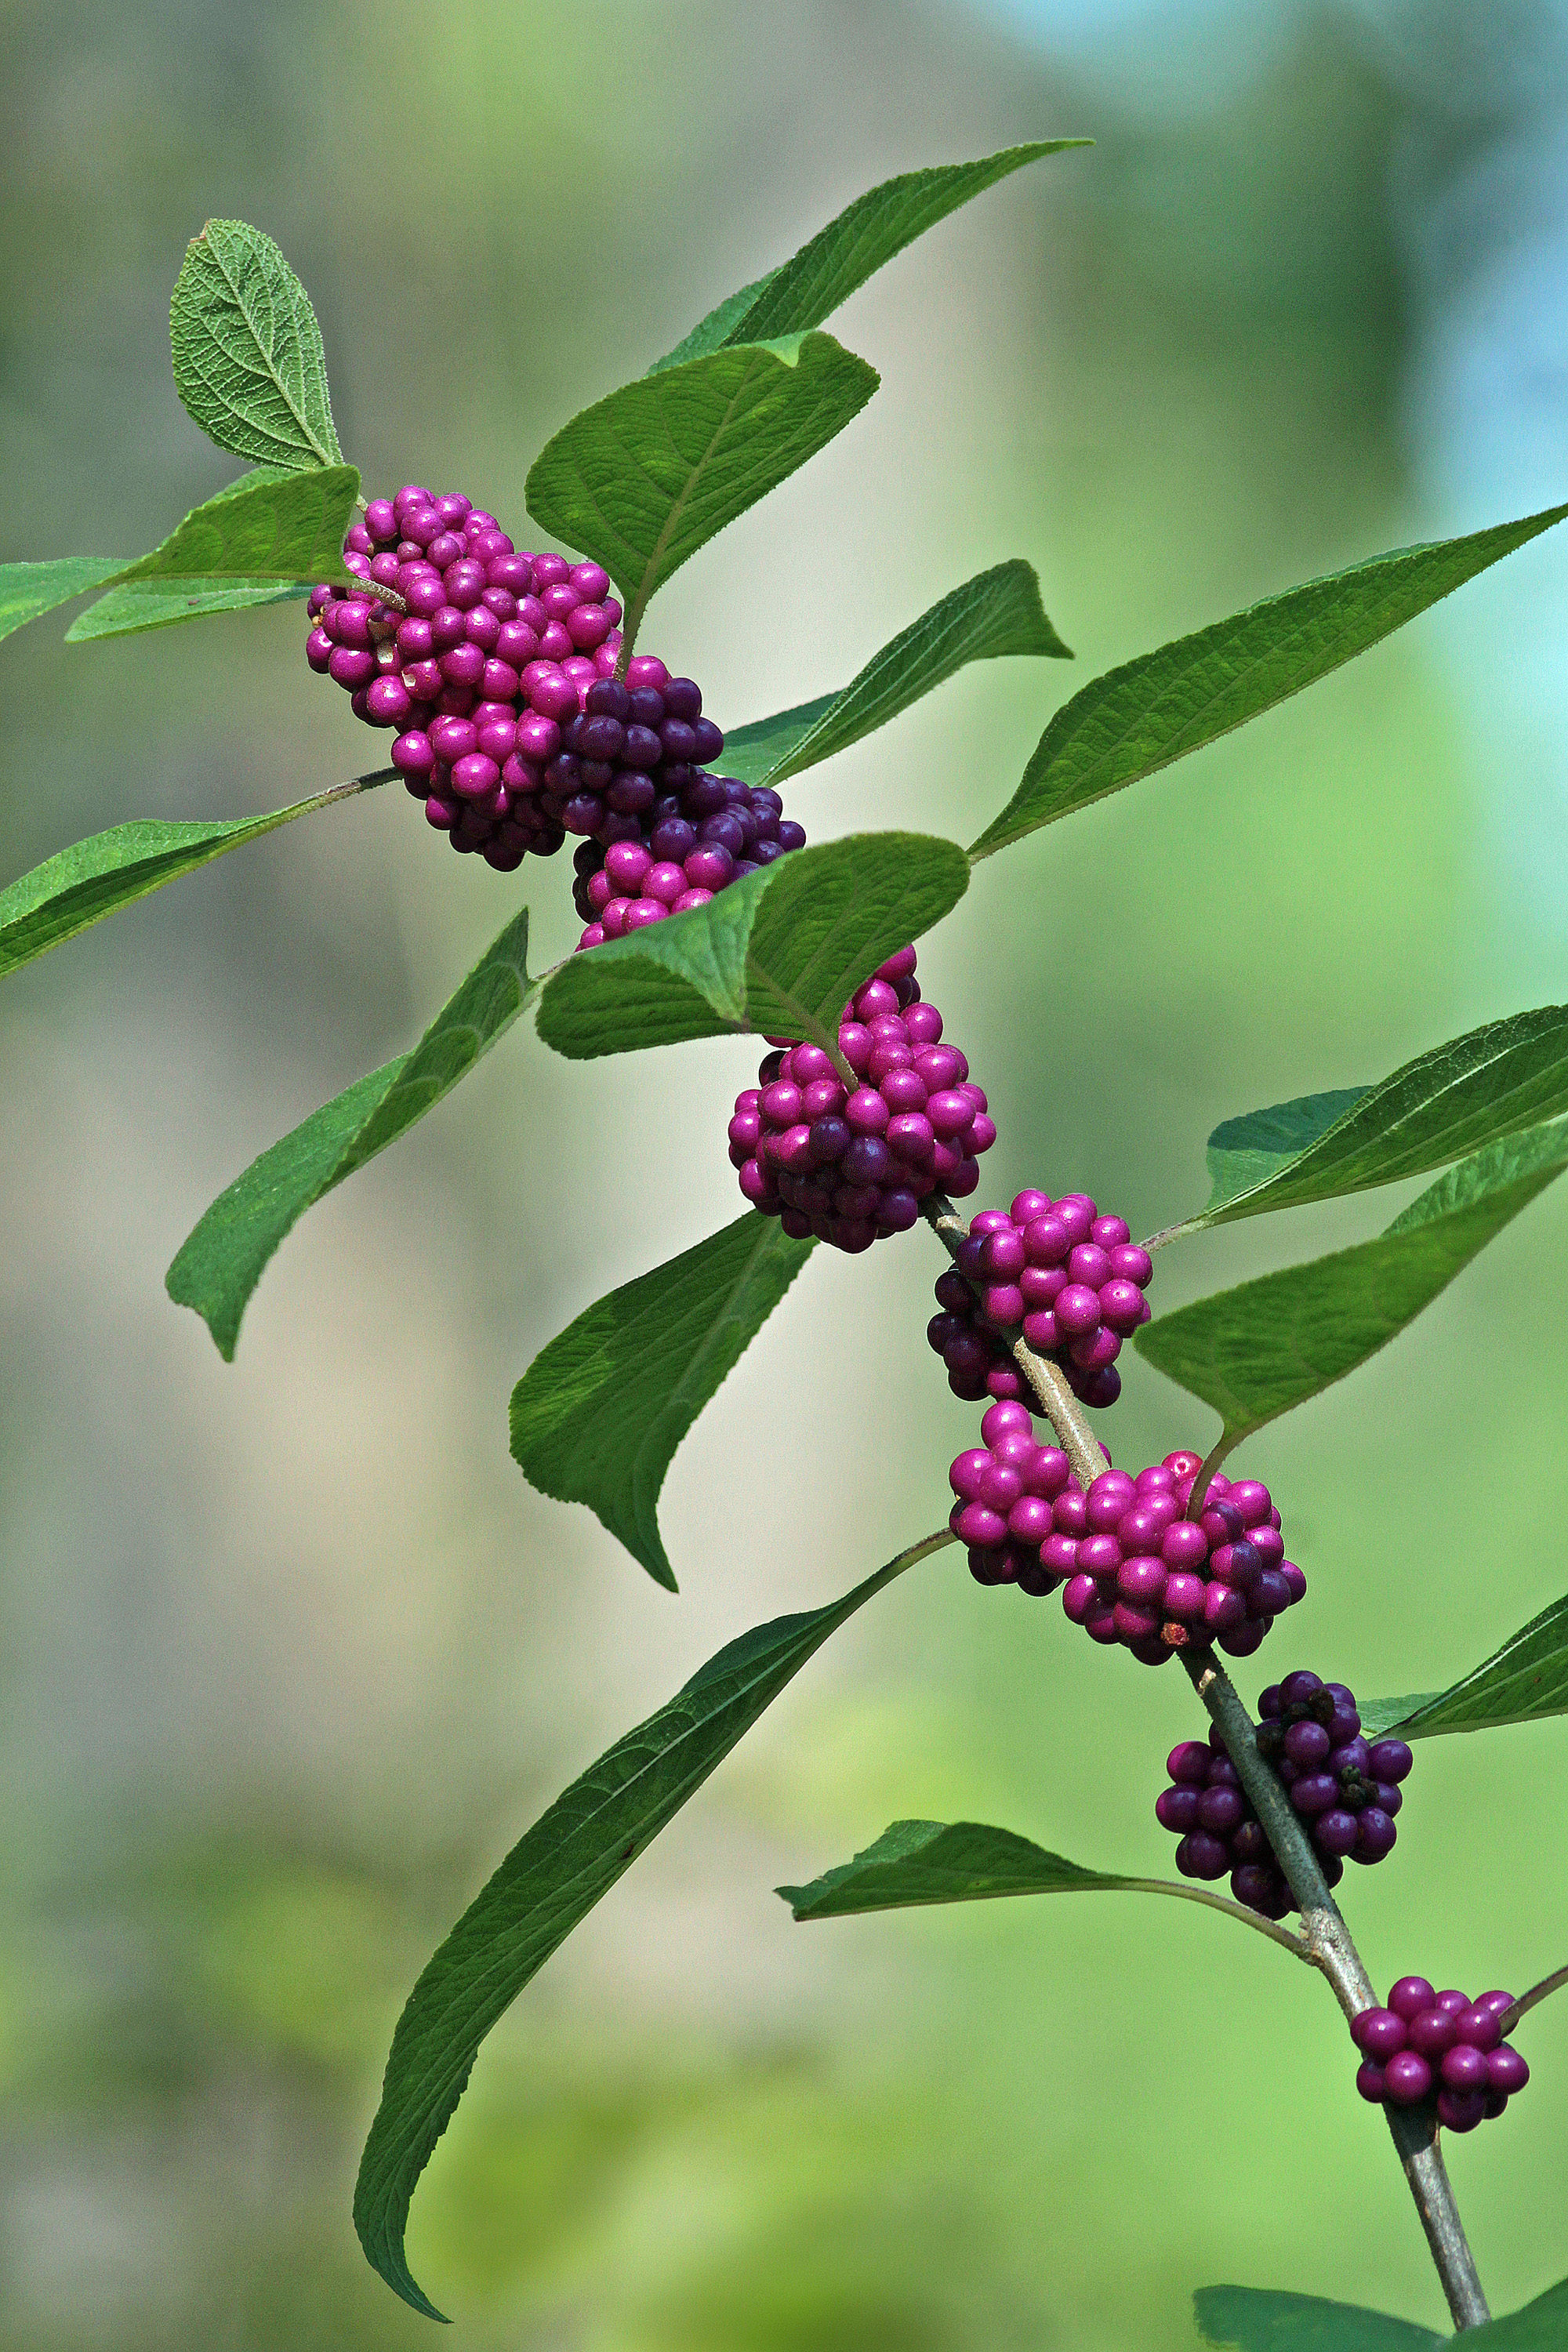 The Scientific Name is Callicarpa americana. You will likely hear them called Beautyberry, American Beautyberry, French-mulberry. This picture shows the Masses of bright purple fruits develop in leaf axils in autumn.  Ripening fruits attract many species of birds. of Callicarpa americana